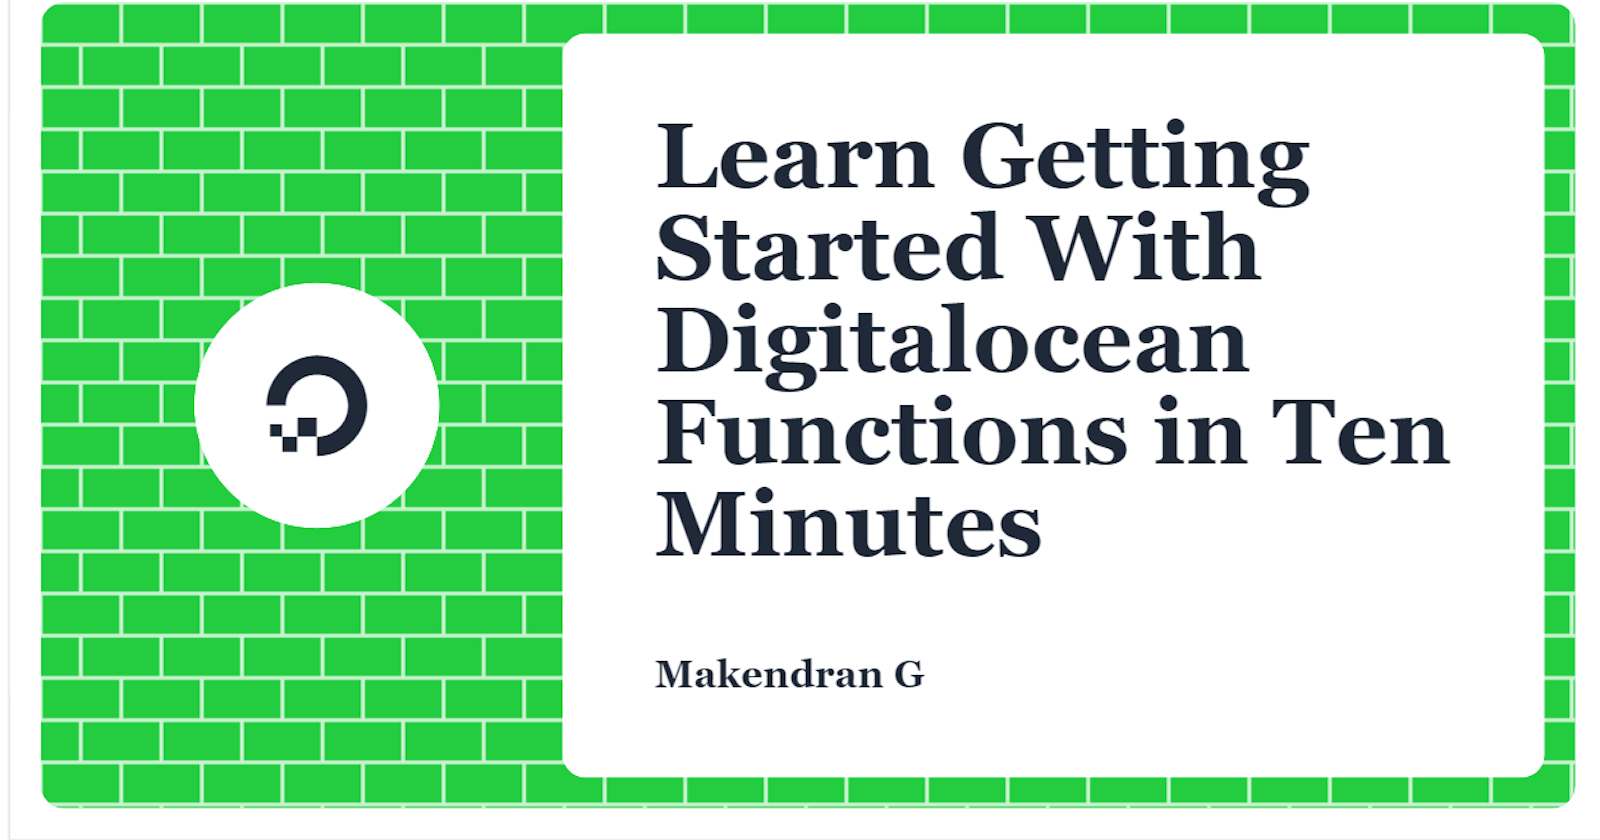 Learn Getting Started With Digitalocean Functions in Ten Minutes